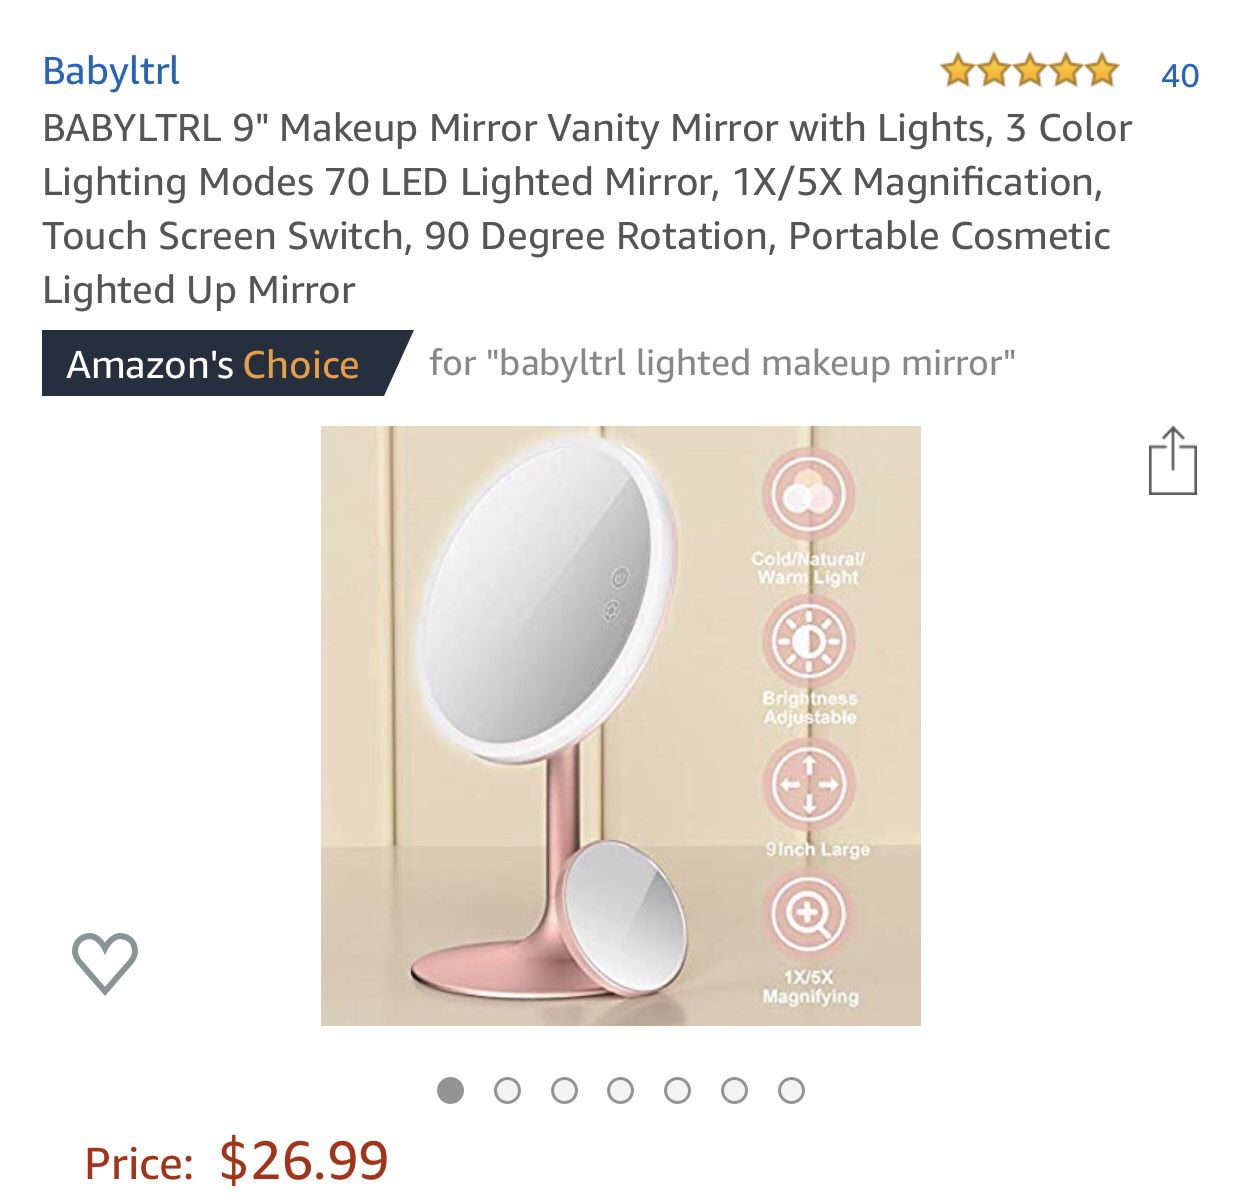 50% discount. 100% 5-star reviews. BABYLTRL 9" Makeup Mirror Vanity Mirror with Lights, 3 Color Lighting Modes 70 LED Lighted Mirror, 1X/5X Magnifica